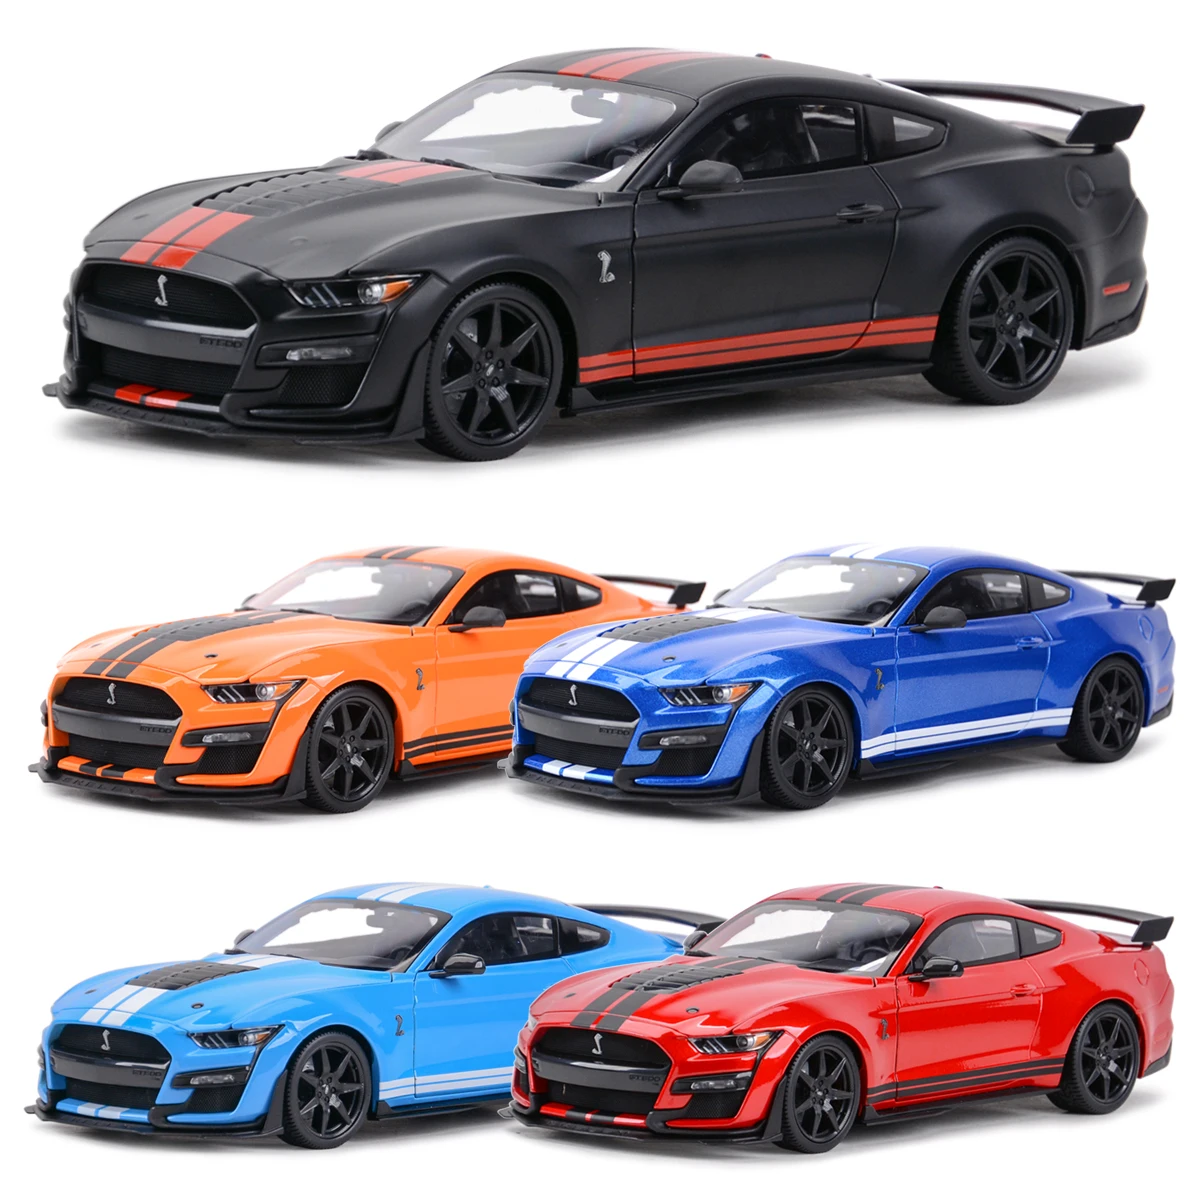 

SVIP Maisto 1:18 2020 Mustang Shelby GT500 Ford Sports Car Static Die Cast Vehicles Collectible Model Car Toys